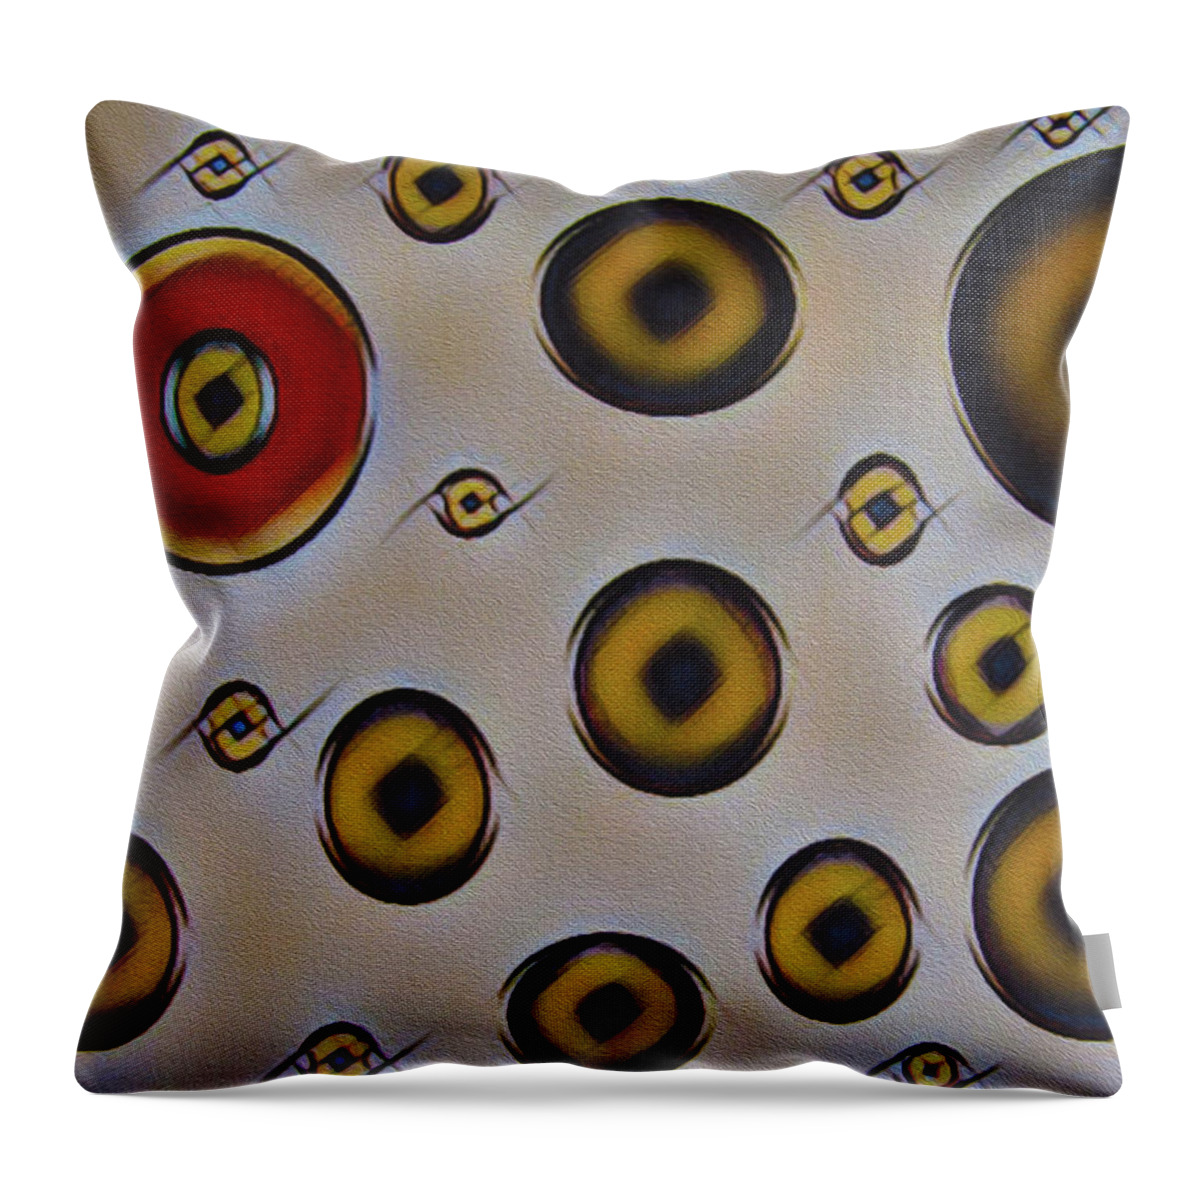 Faces Throw Pillow featuring the painting Eyes In The Sky by Robert Margetts